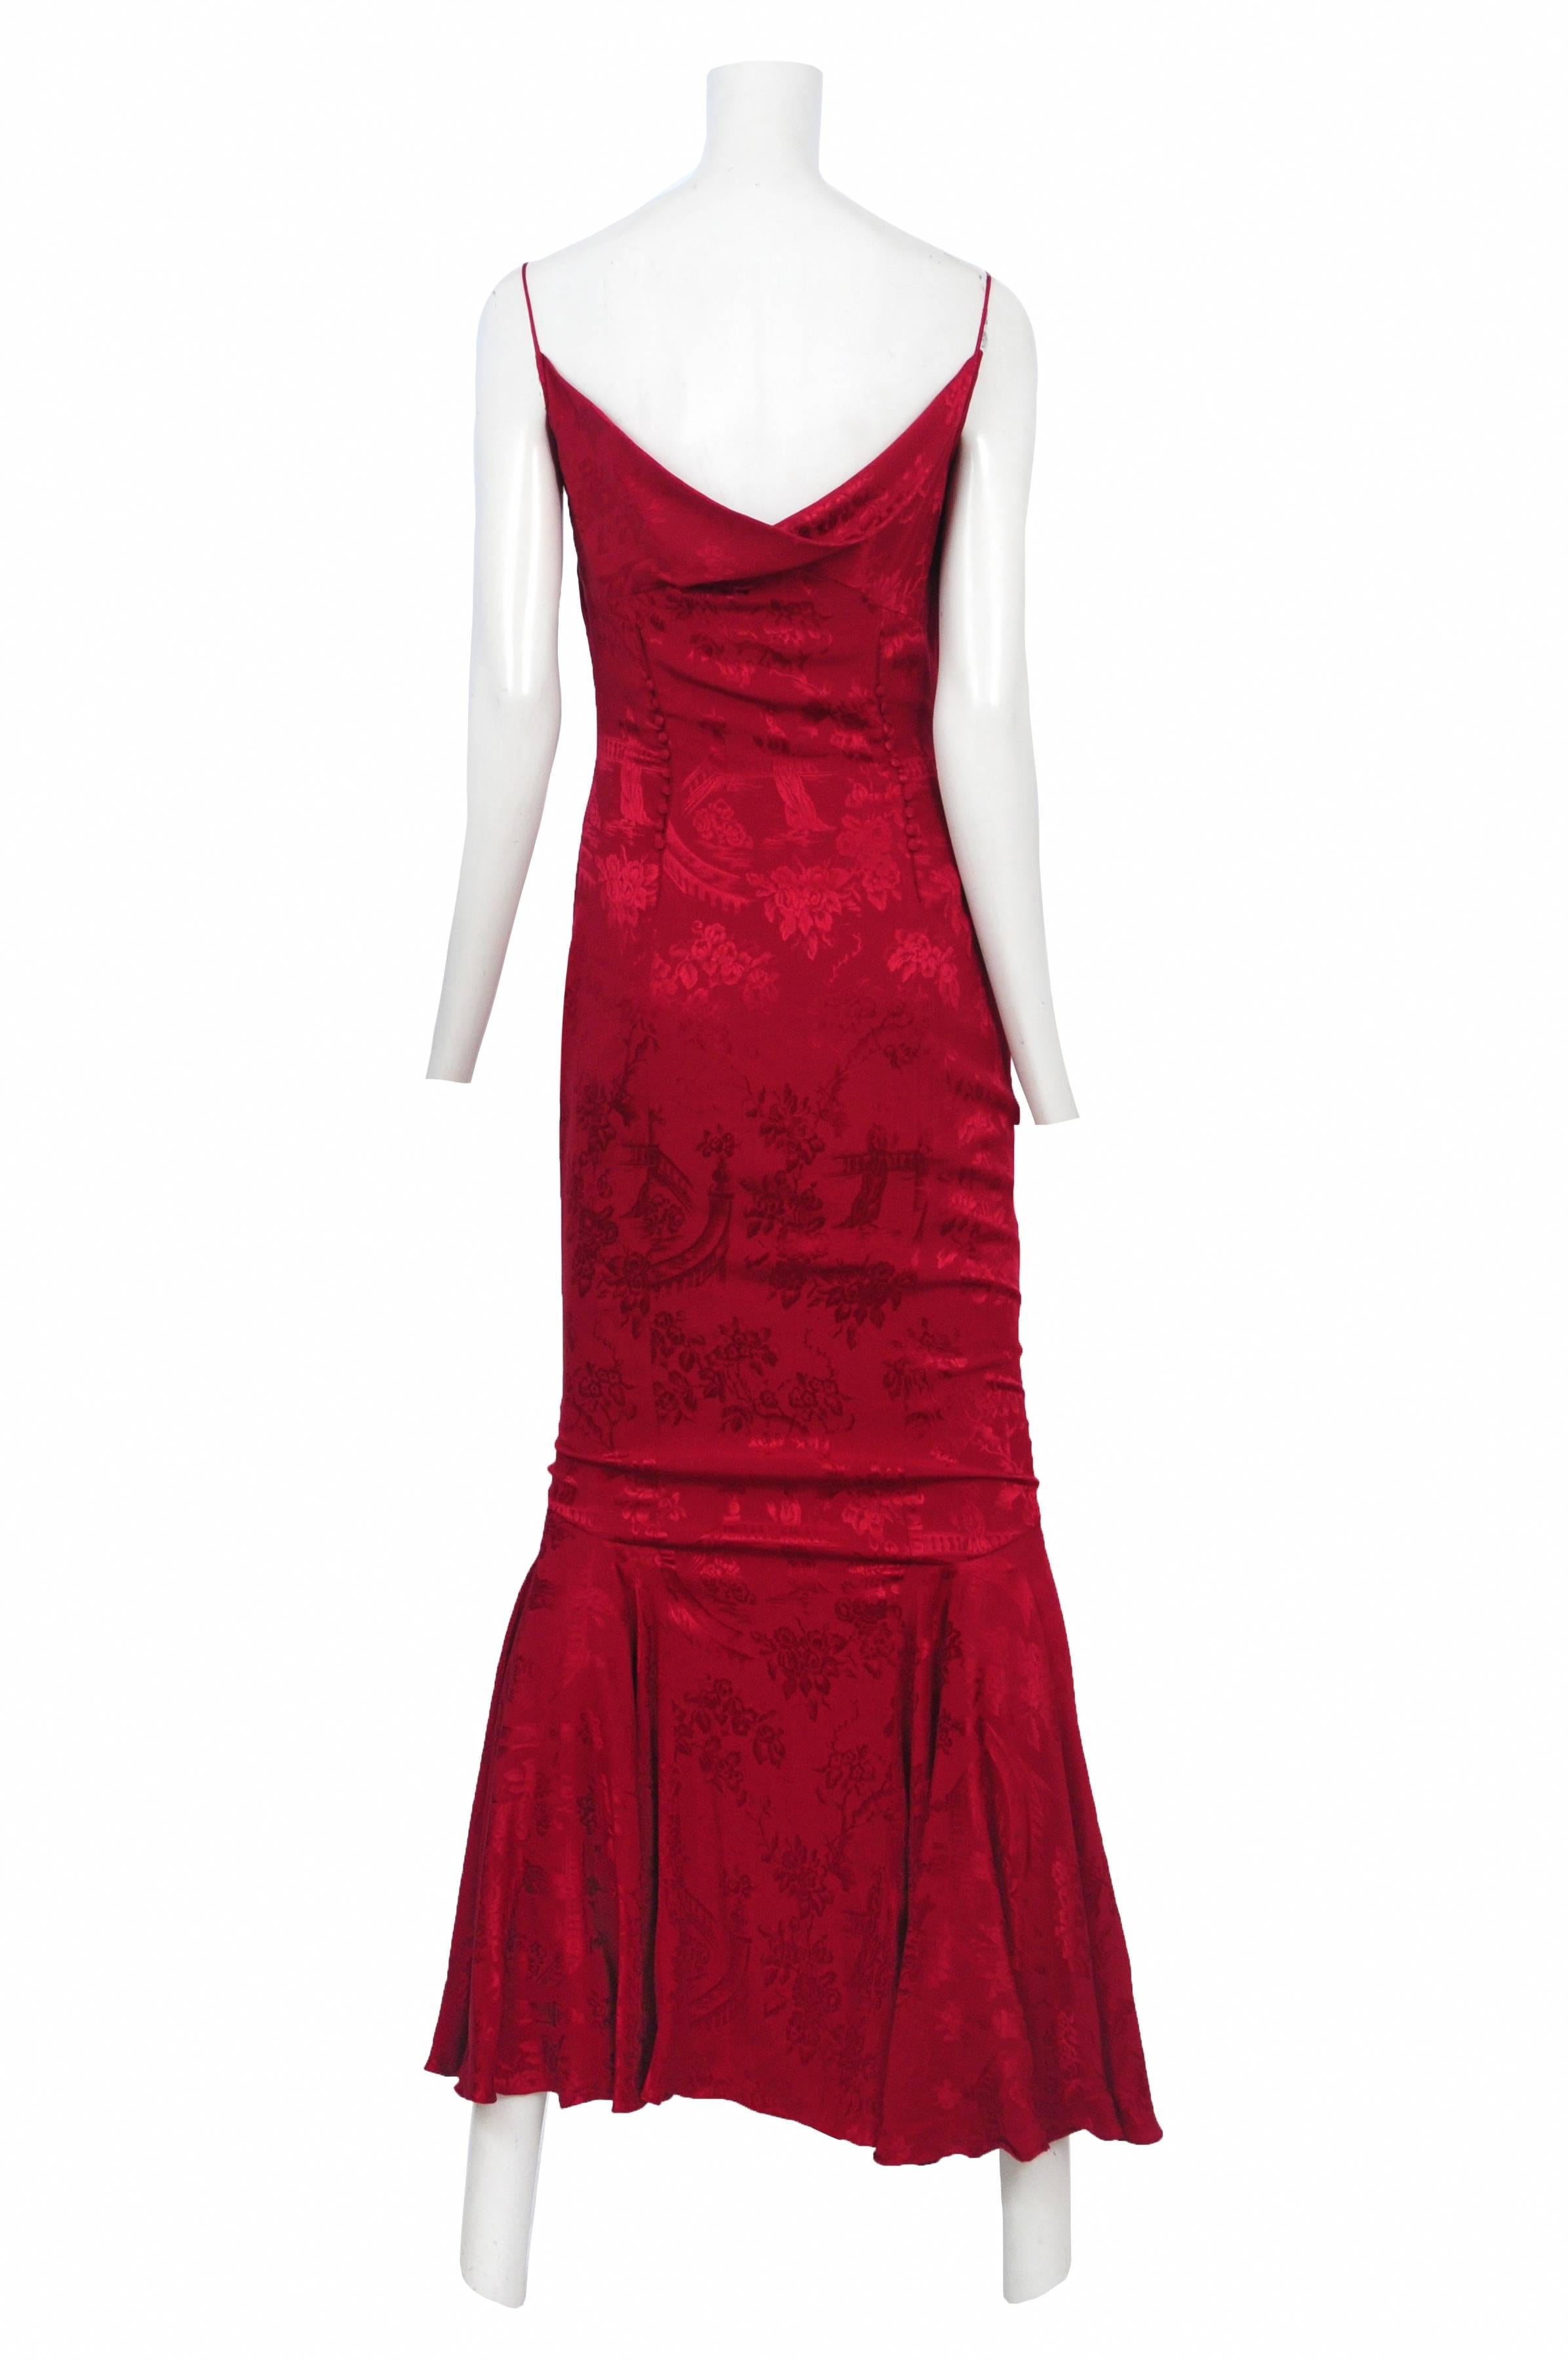 Vintage John Galliano red floral damask gown featuring spaghetti straps, a cowl at the front bust and godets at the hem. 